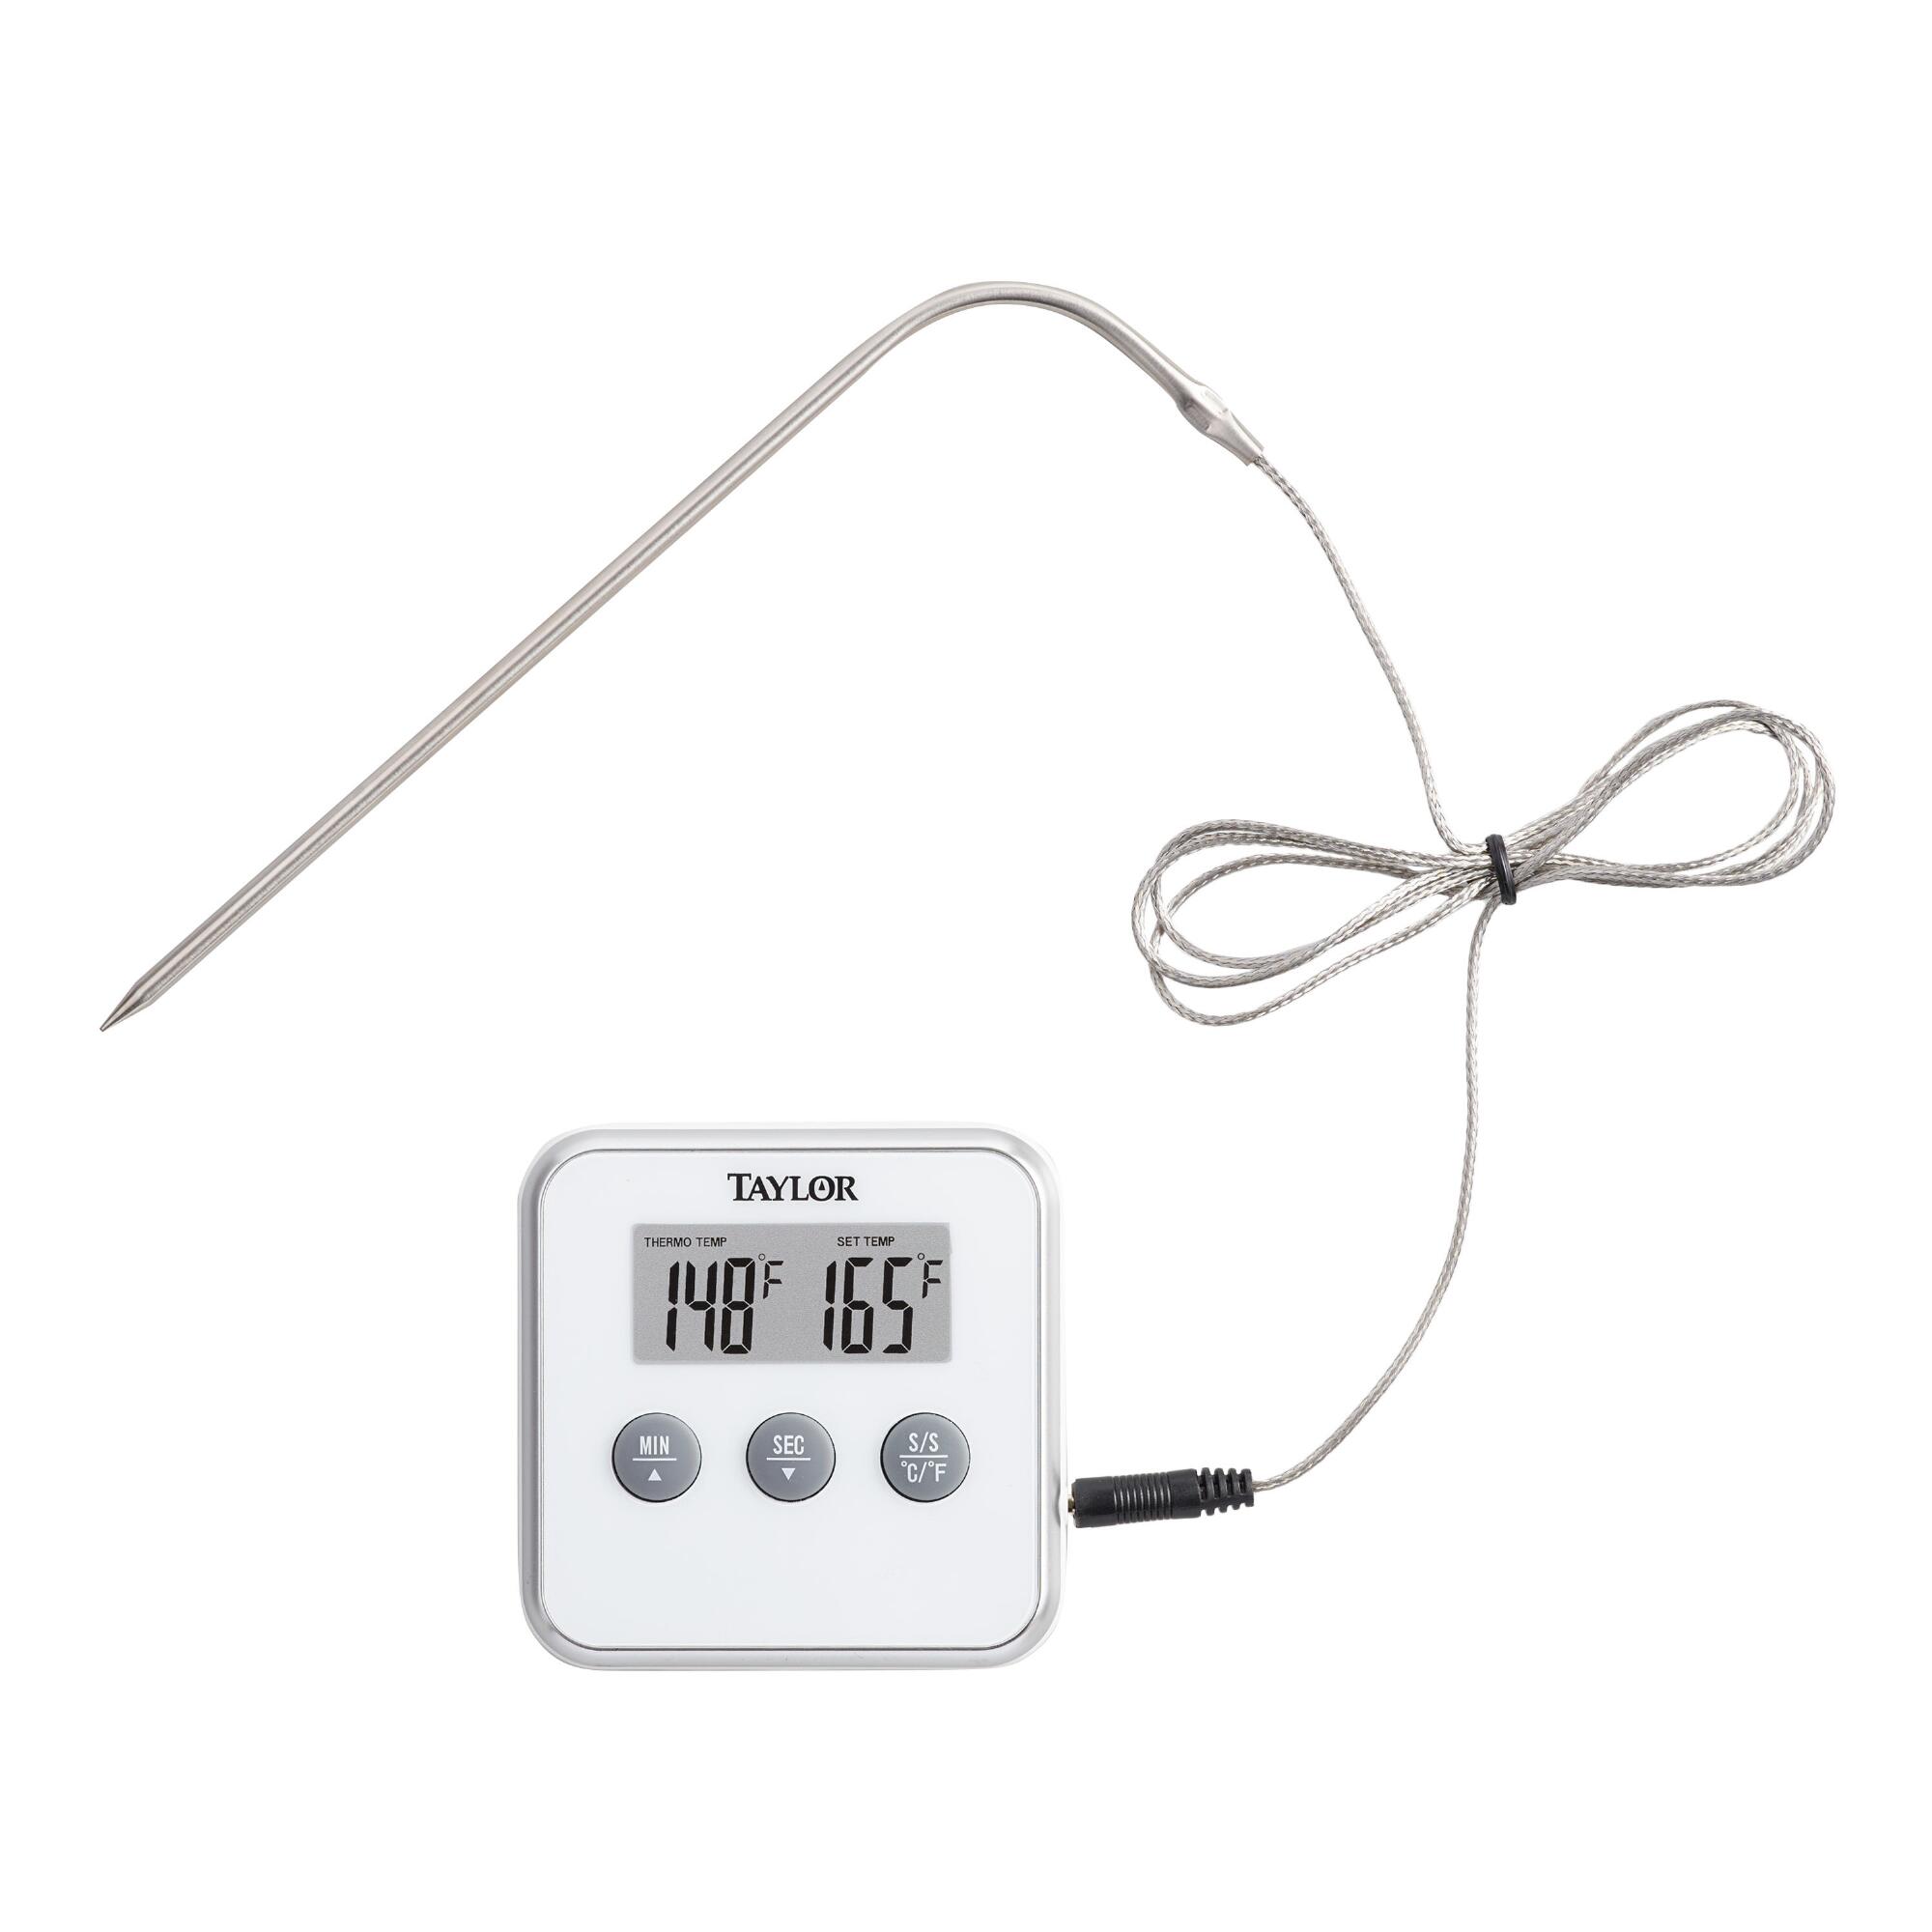 Taylor Adjustable Digital Thermometer by World Market